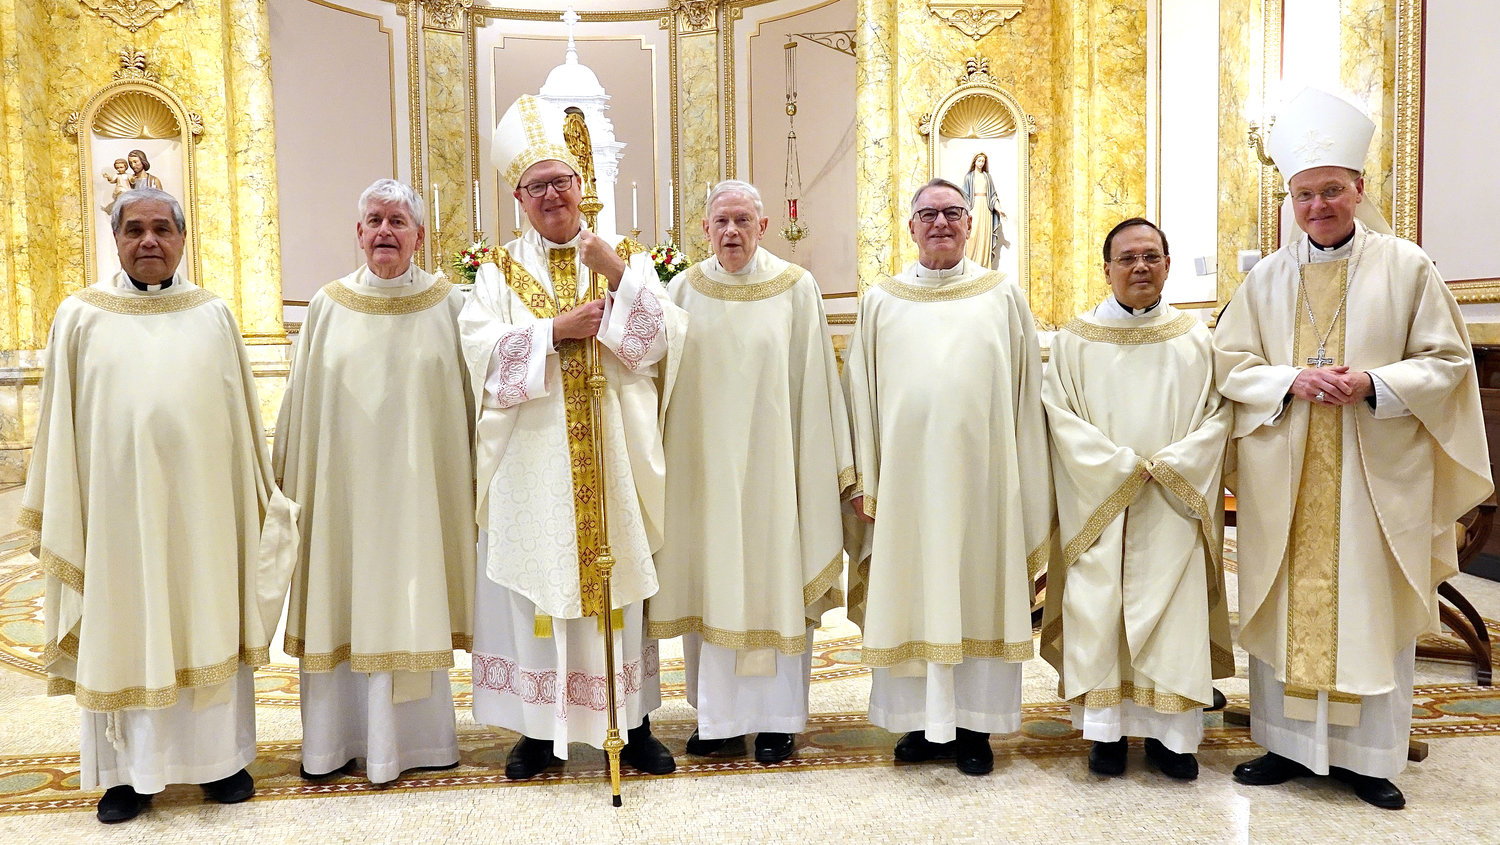 Members of the Ordination Class of 1970 join Cardinal Dolan, center, and Auxiliary Bishop Edmund Whalen, vicar for clergy, right. From left, the jubilarians are Father Joseph Victor Maynigo-Arenas, Msgr. Michael Crimmins, Father Patrick Dunne,  Msgr. James Sullivan and Father Jose Marabe.